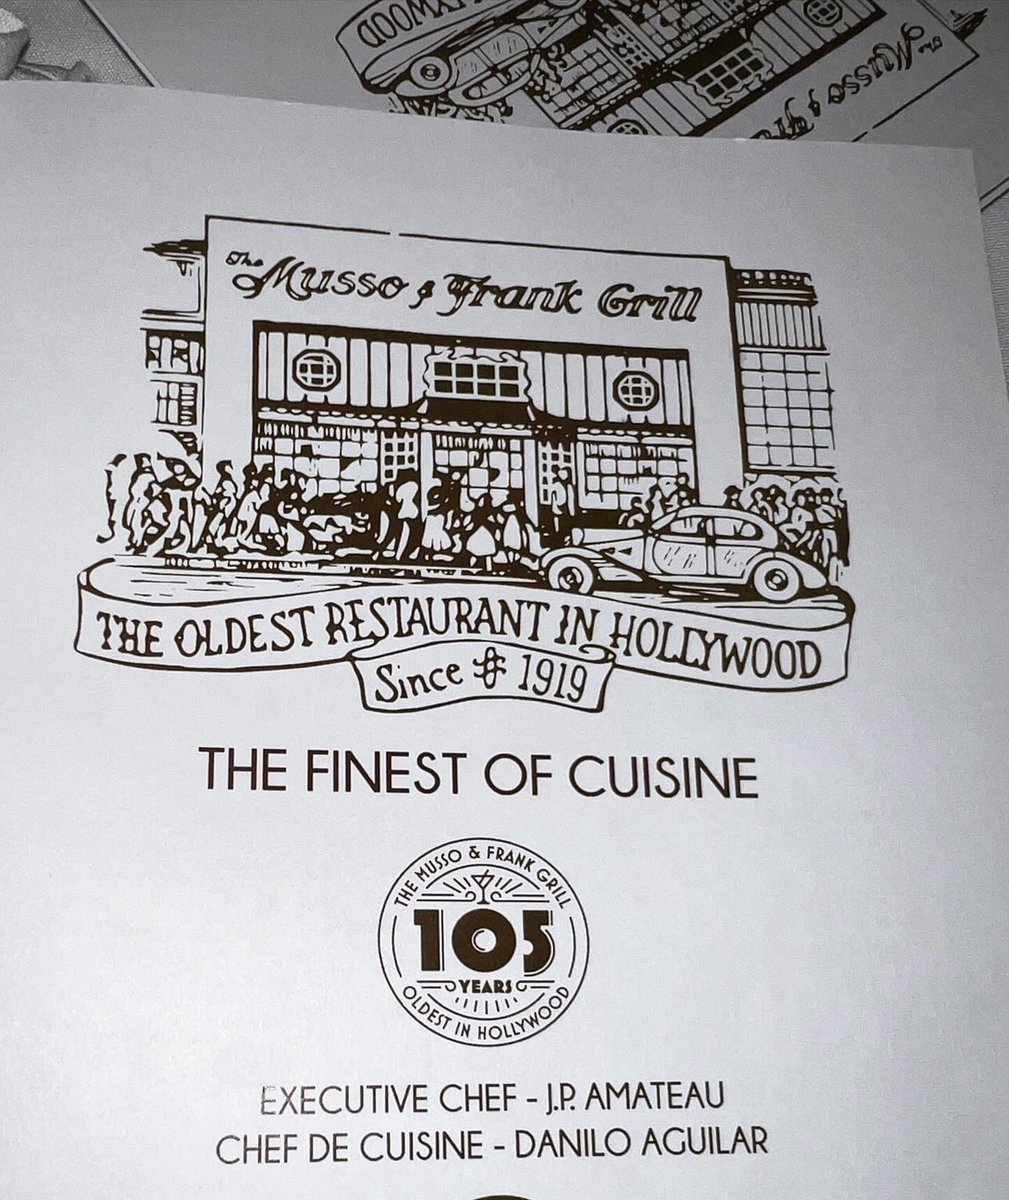 So for tonight‘s date night, we tried Musso & Franks, the oldest restaurant in Hollywood, having been open for more than 100 years! I love old Hollywood and all the magic and memories it represents. What’s your favorite classic movie and what makes it special to you? 💙💖